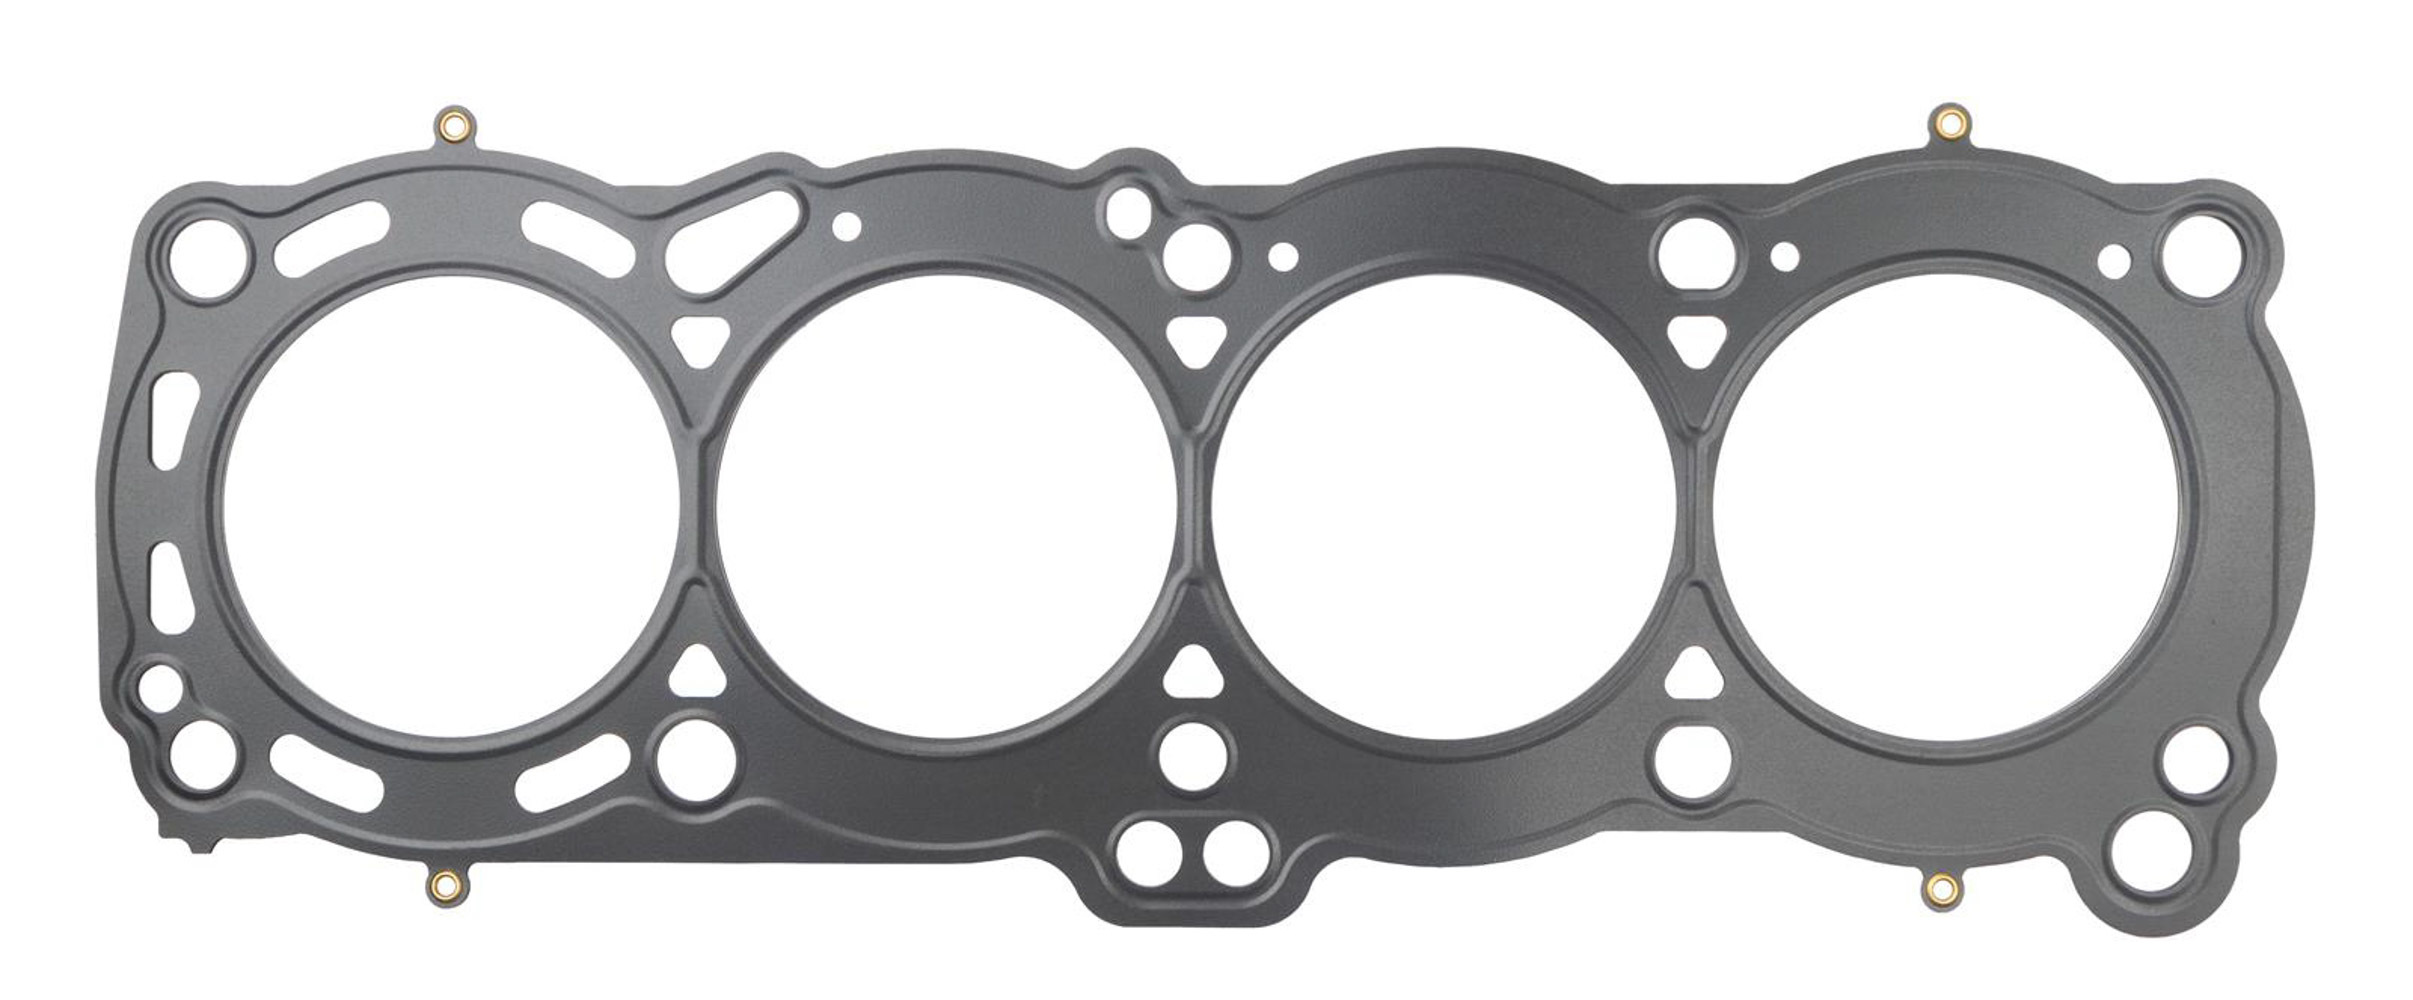 SCE Gaskets M338135GS - Cylinder Head Gasket, MLS Spartan, 85.00 mm Bore, 1.30 mm Compression Thickness, Multi-Layer Steel, Nissan 4-Cylinder, Each